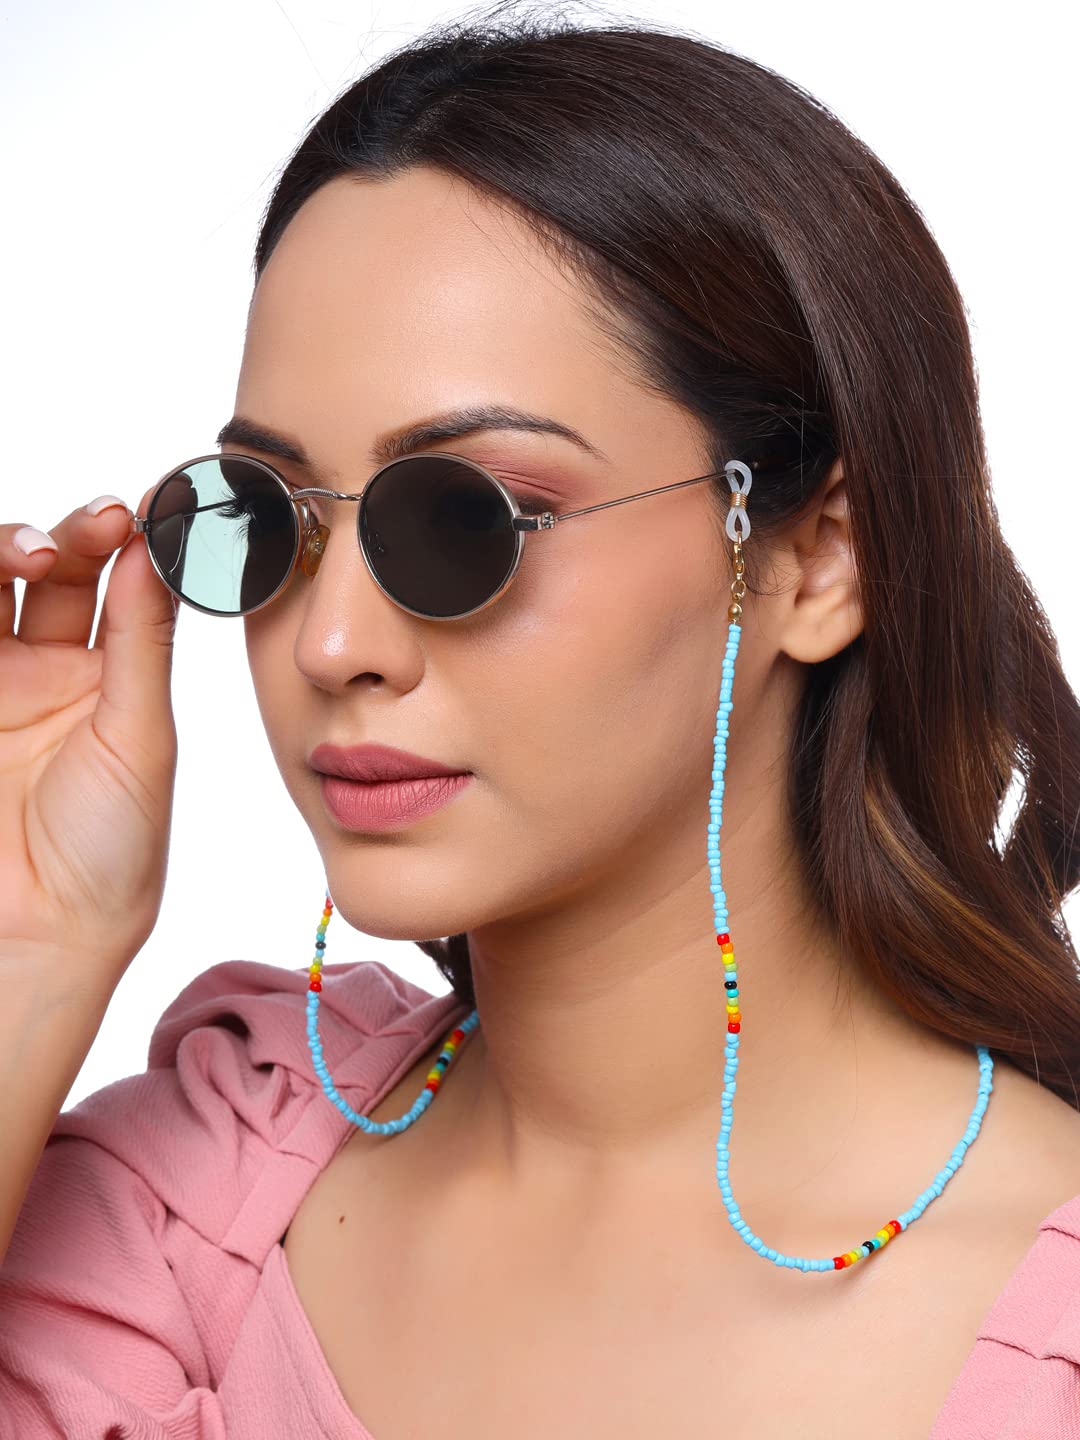 Yellow Chimes Sunglasses Chain for Women Eyeglasses Chain Multicolor Beadded Face Mask Chains Sunglasses AccessoriesSunglasses Lanyard for Girls and Women MOdel-1